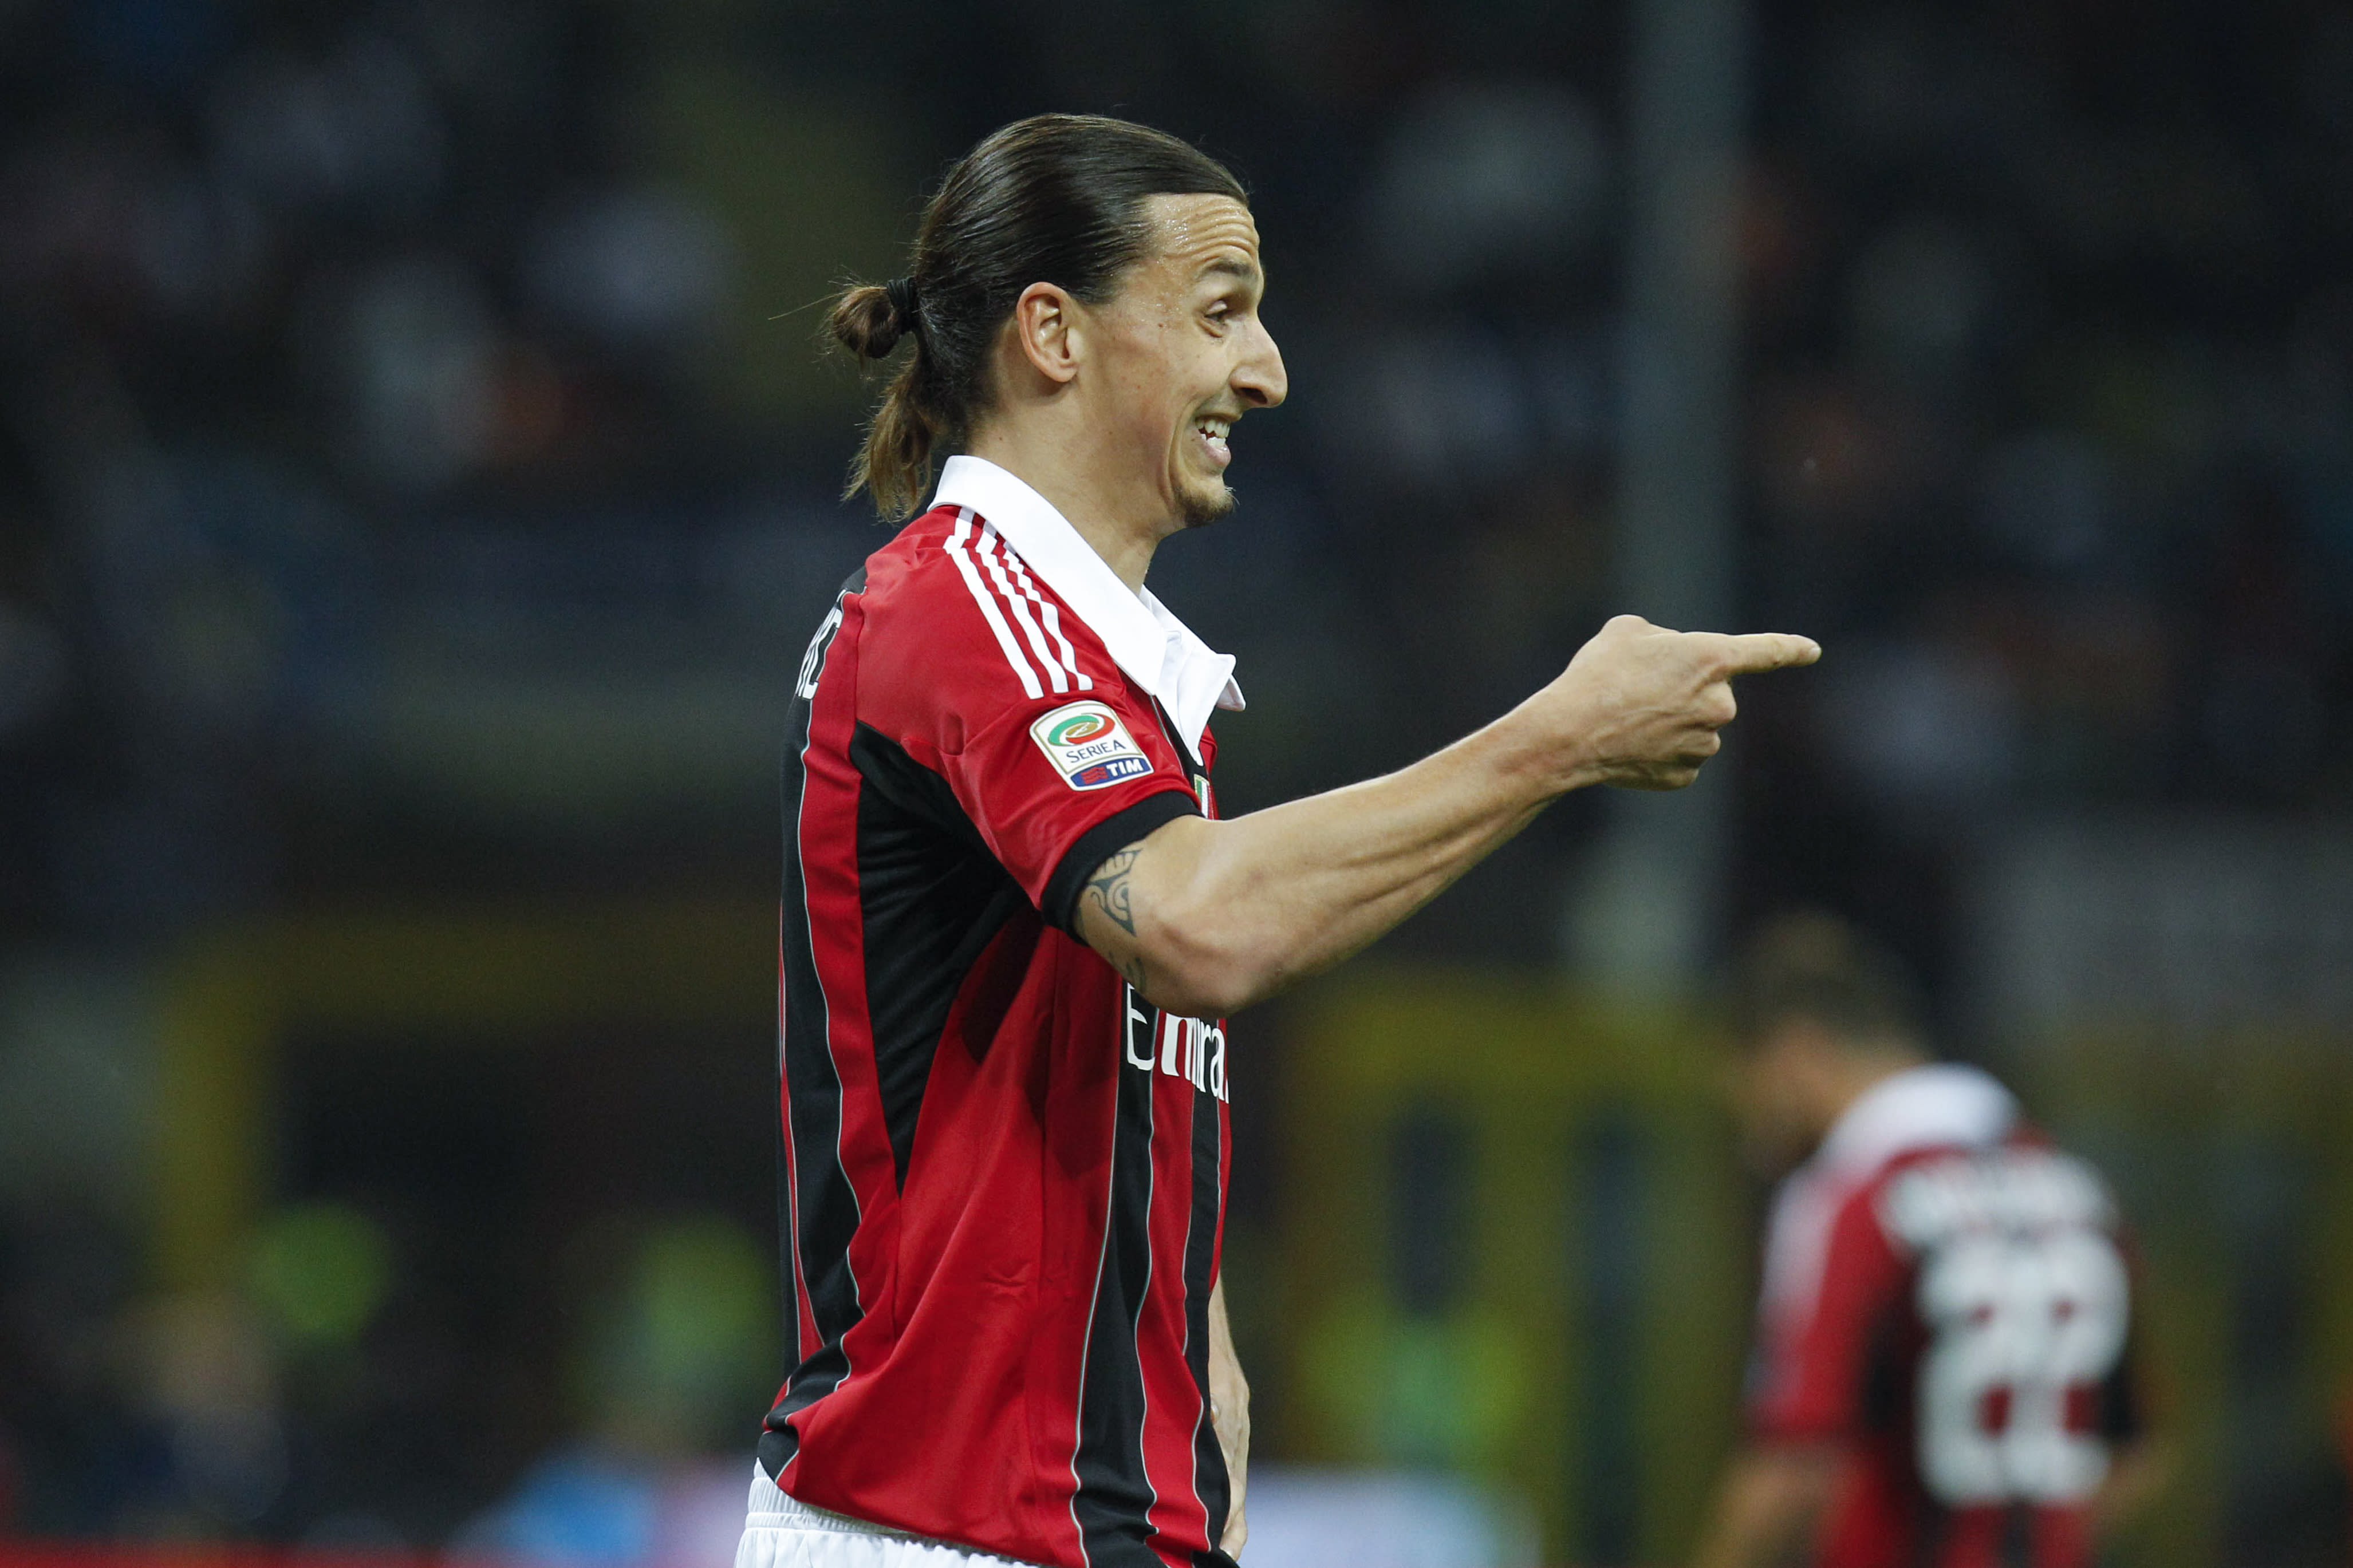 AC Milan's fans banking on Ibrahimovic to rescue ailing club